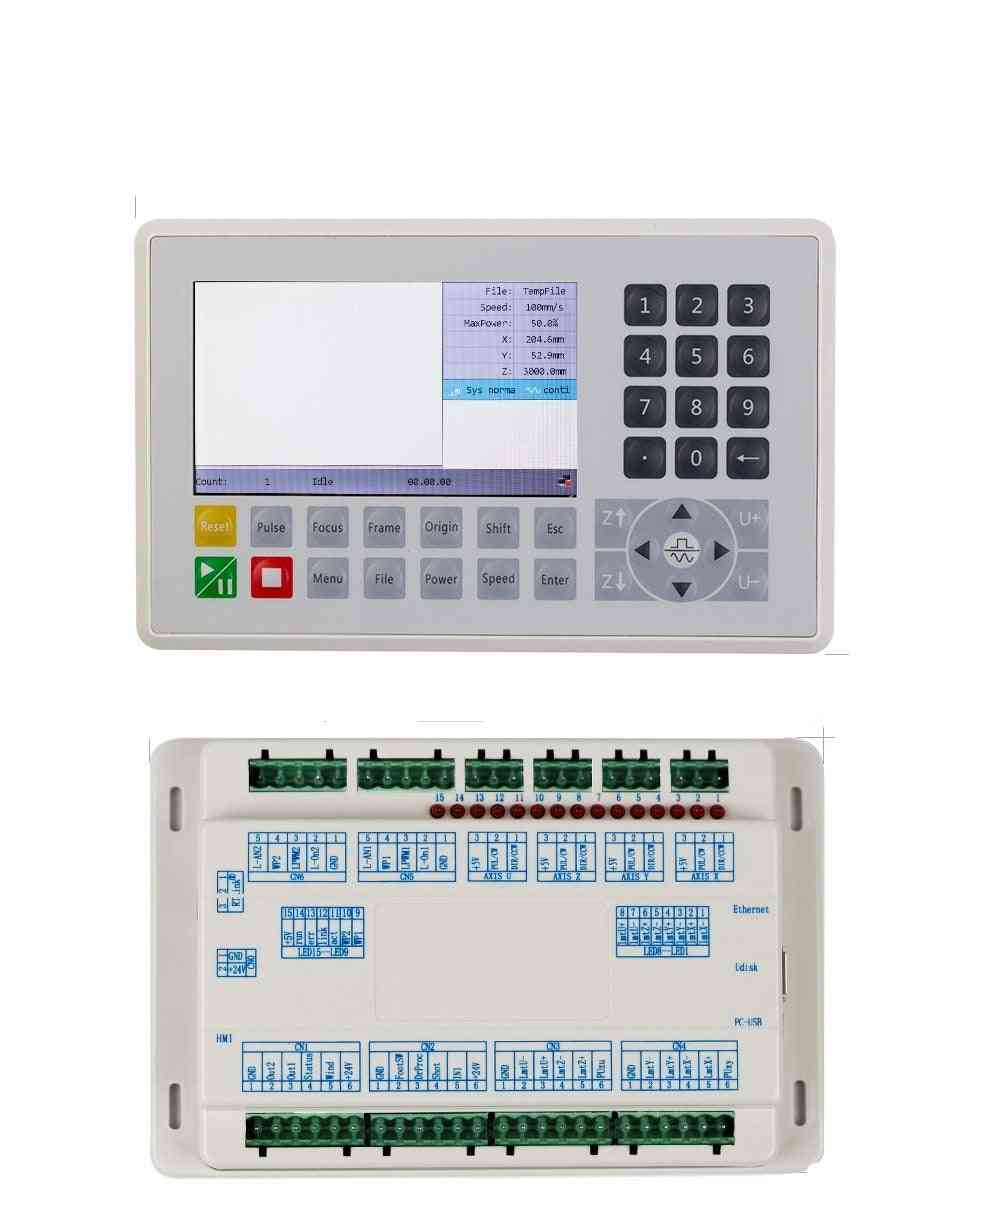 Rdc6445g/ Rdc6445s- Controller For Laser Engraving, Cutting Machine